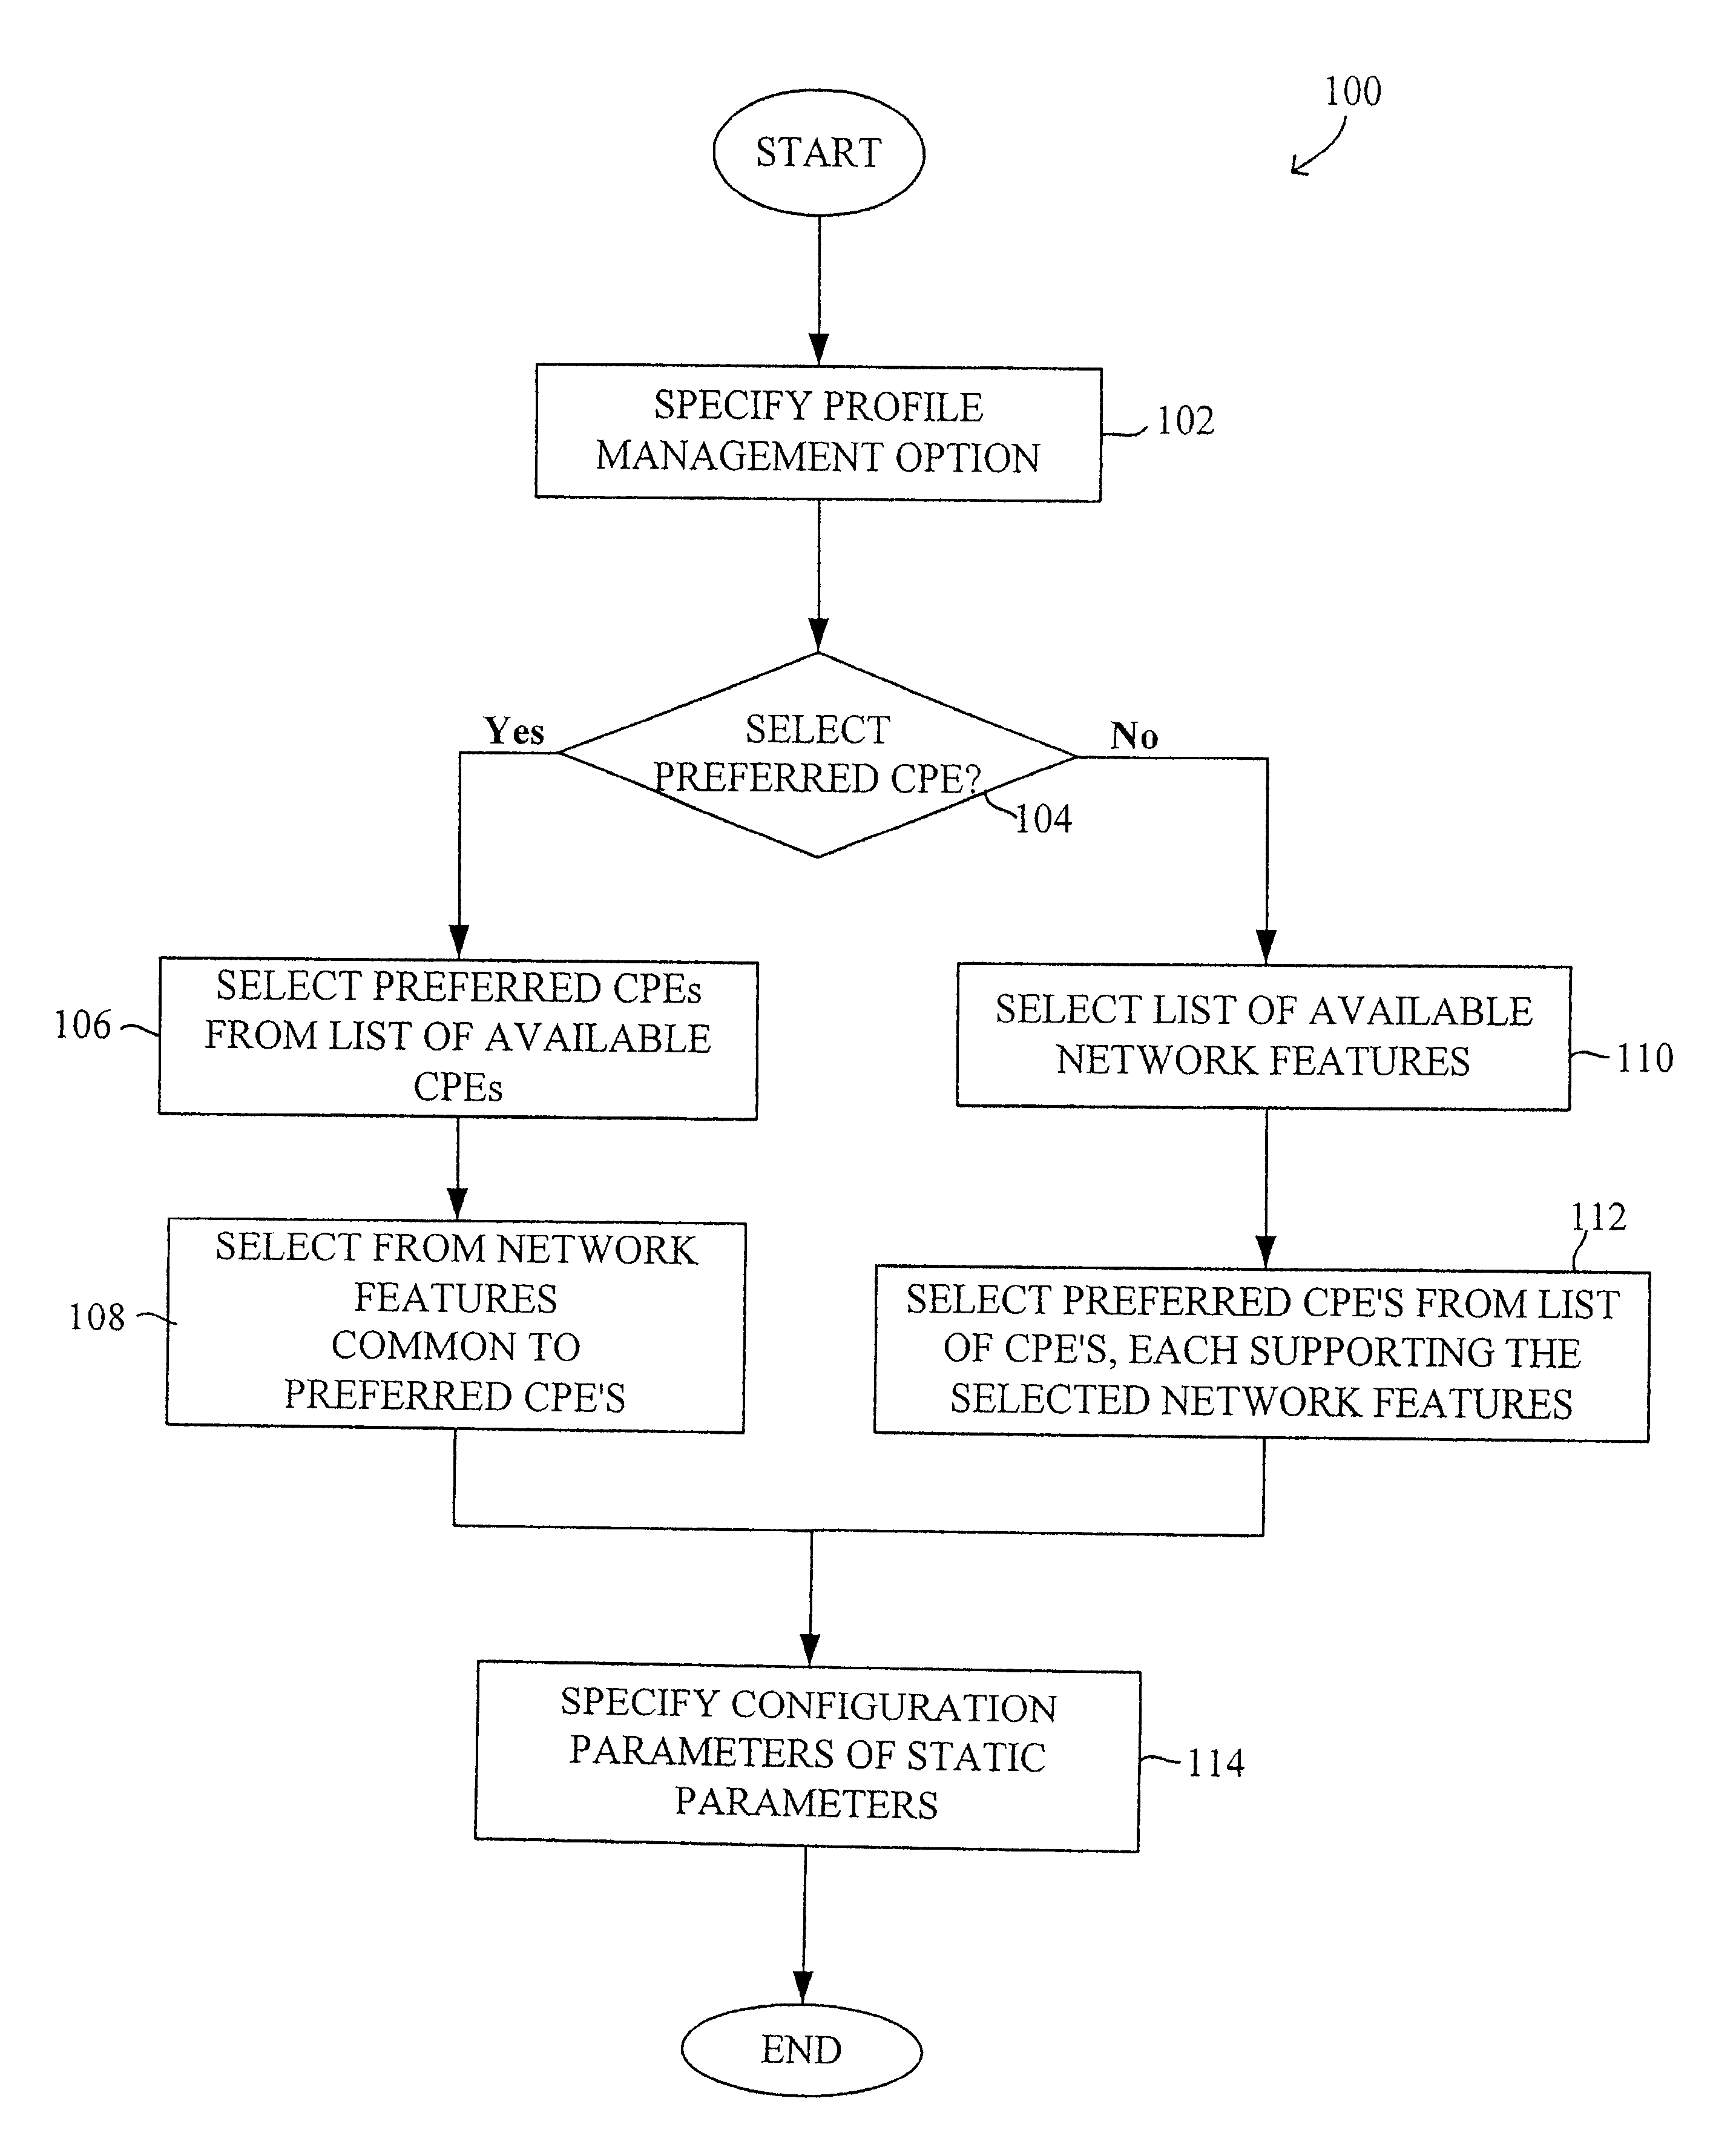 Network profiling system